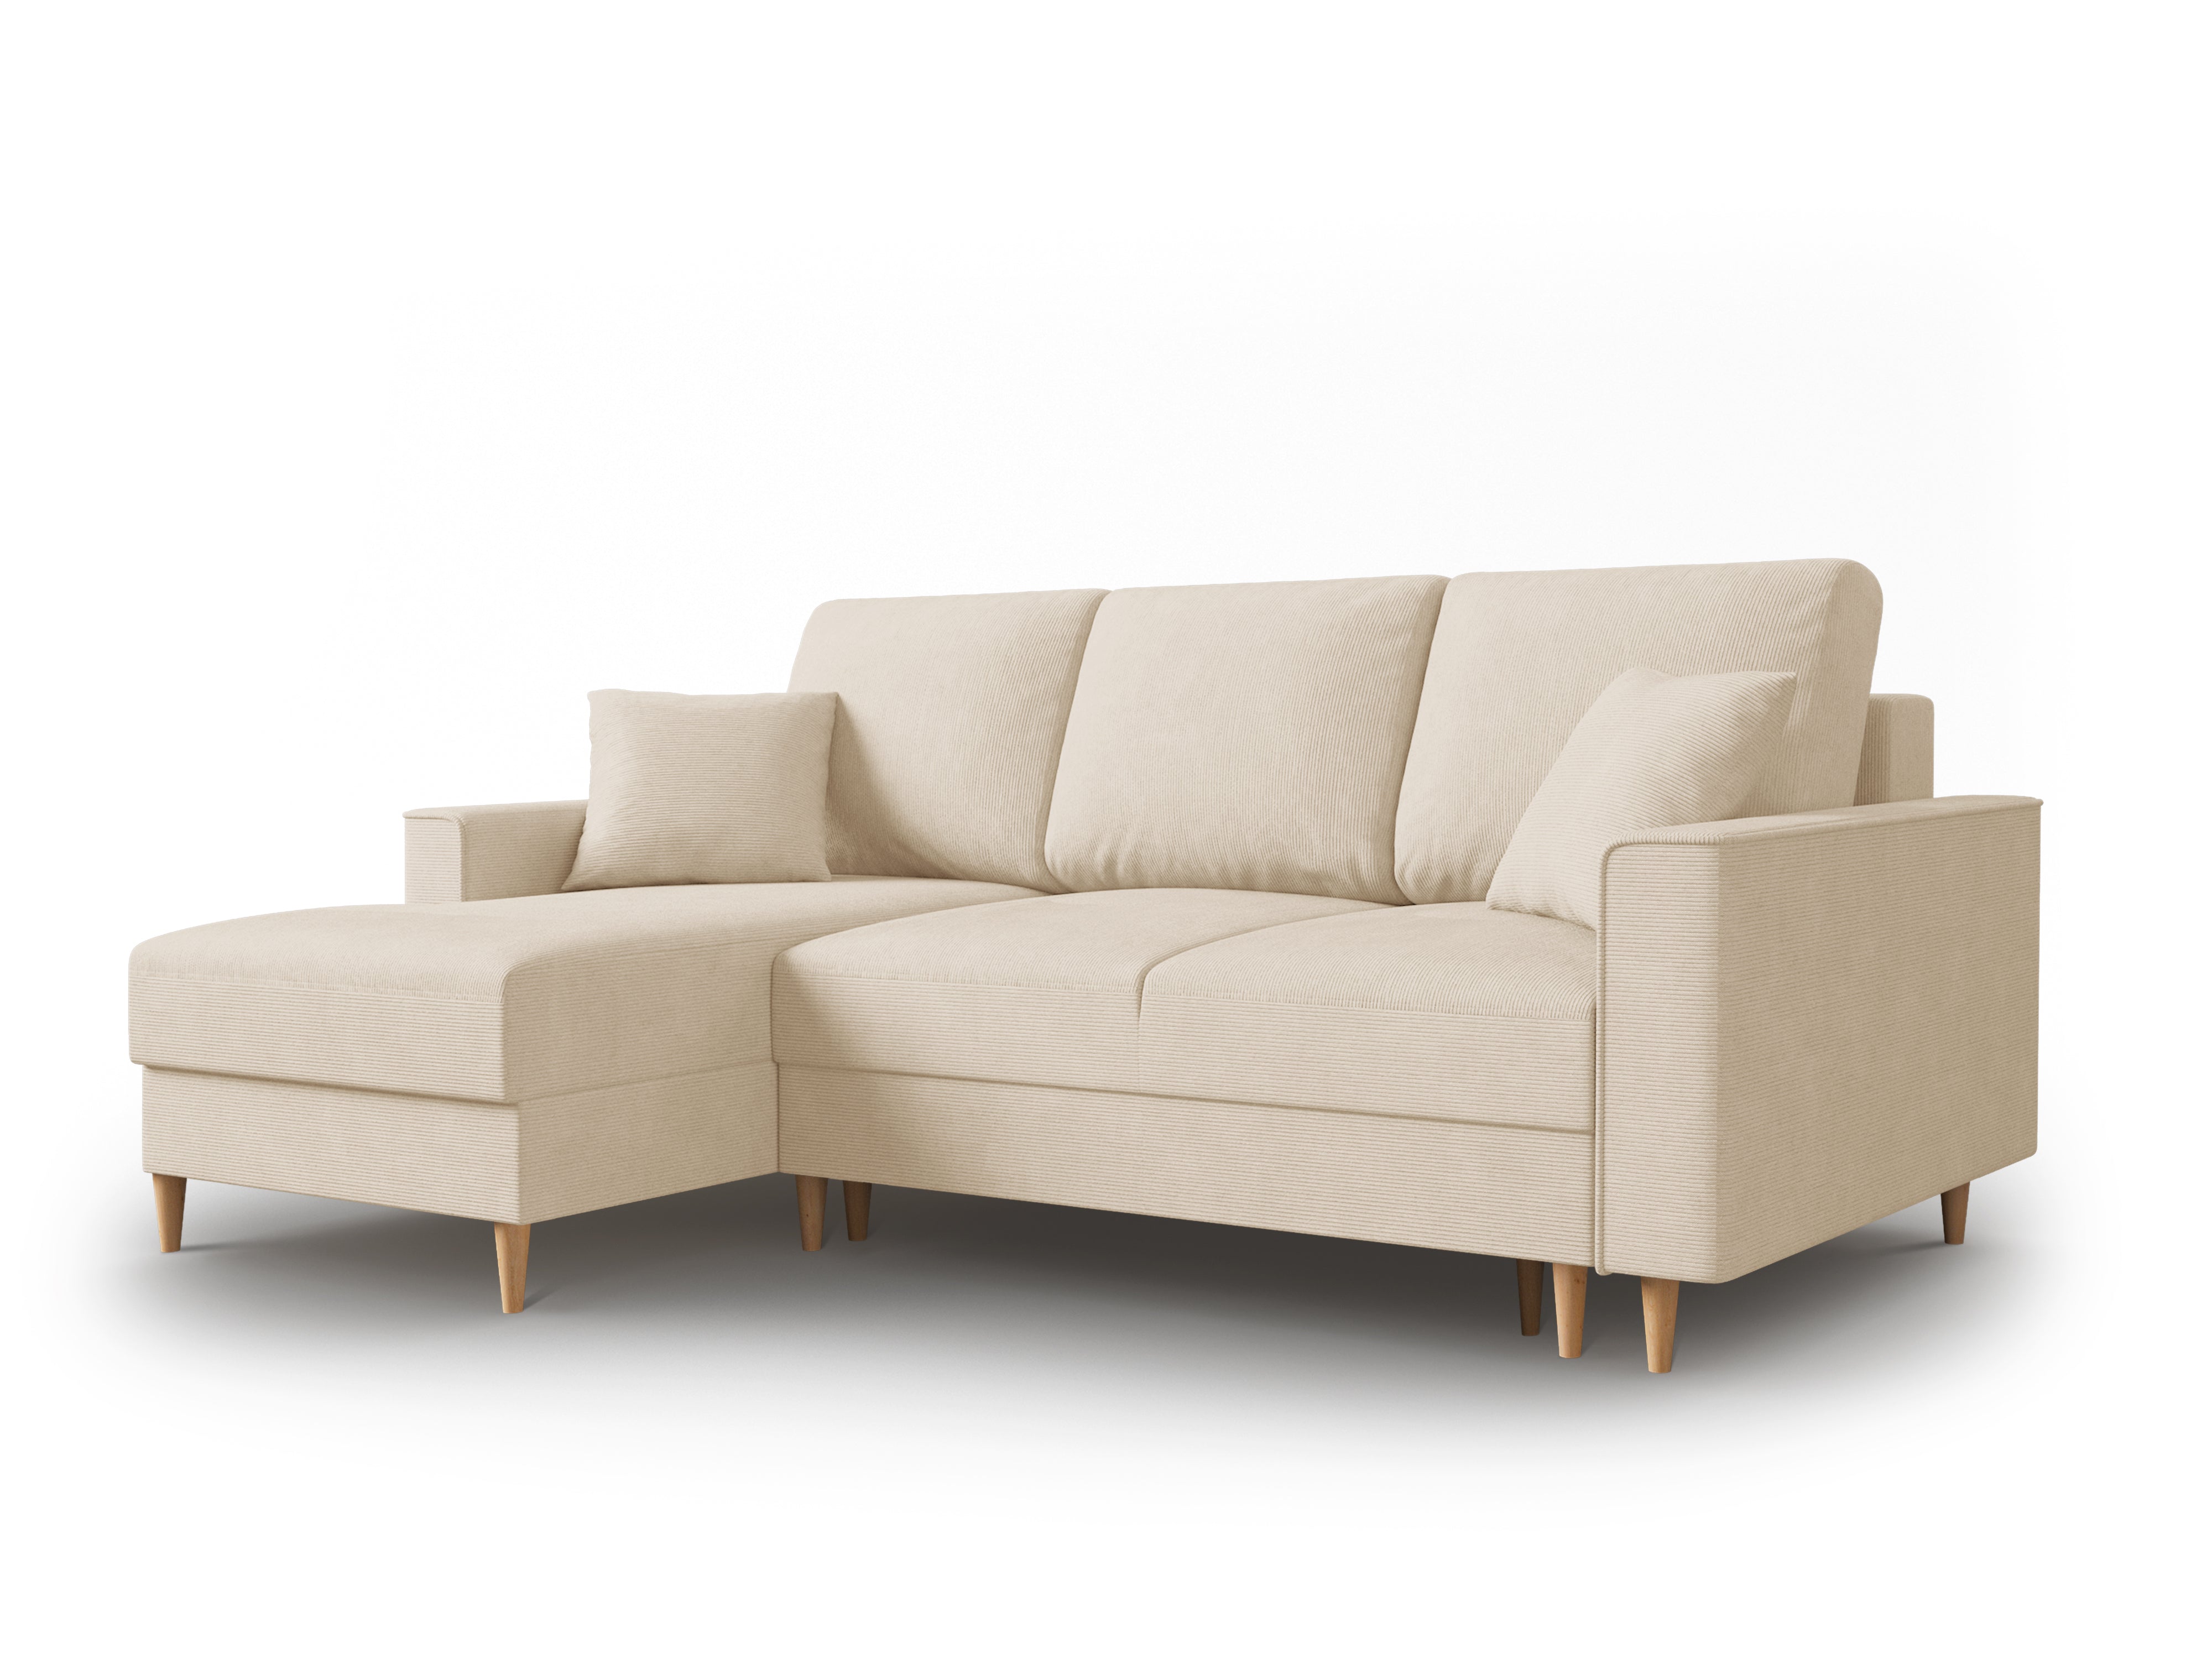 Left Corner Sofa With Bed Function And Box, "Cartadera", 4 Seats, 225x147x90
Made in Europe, Mazzini Sofas, Eye on Design